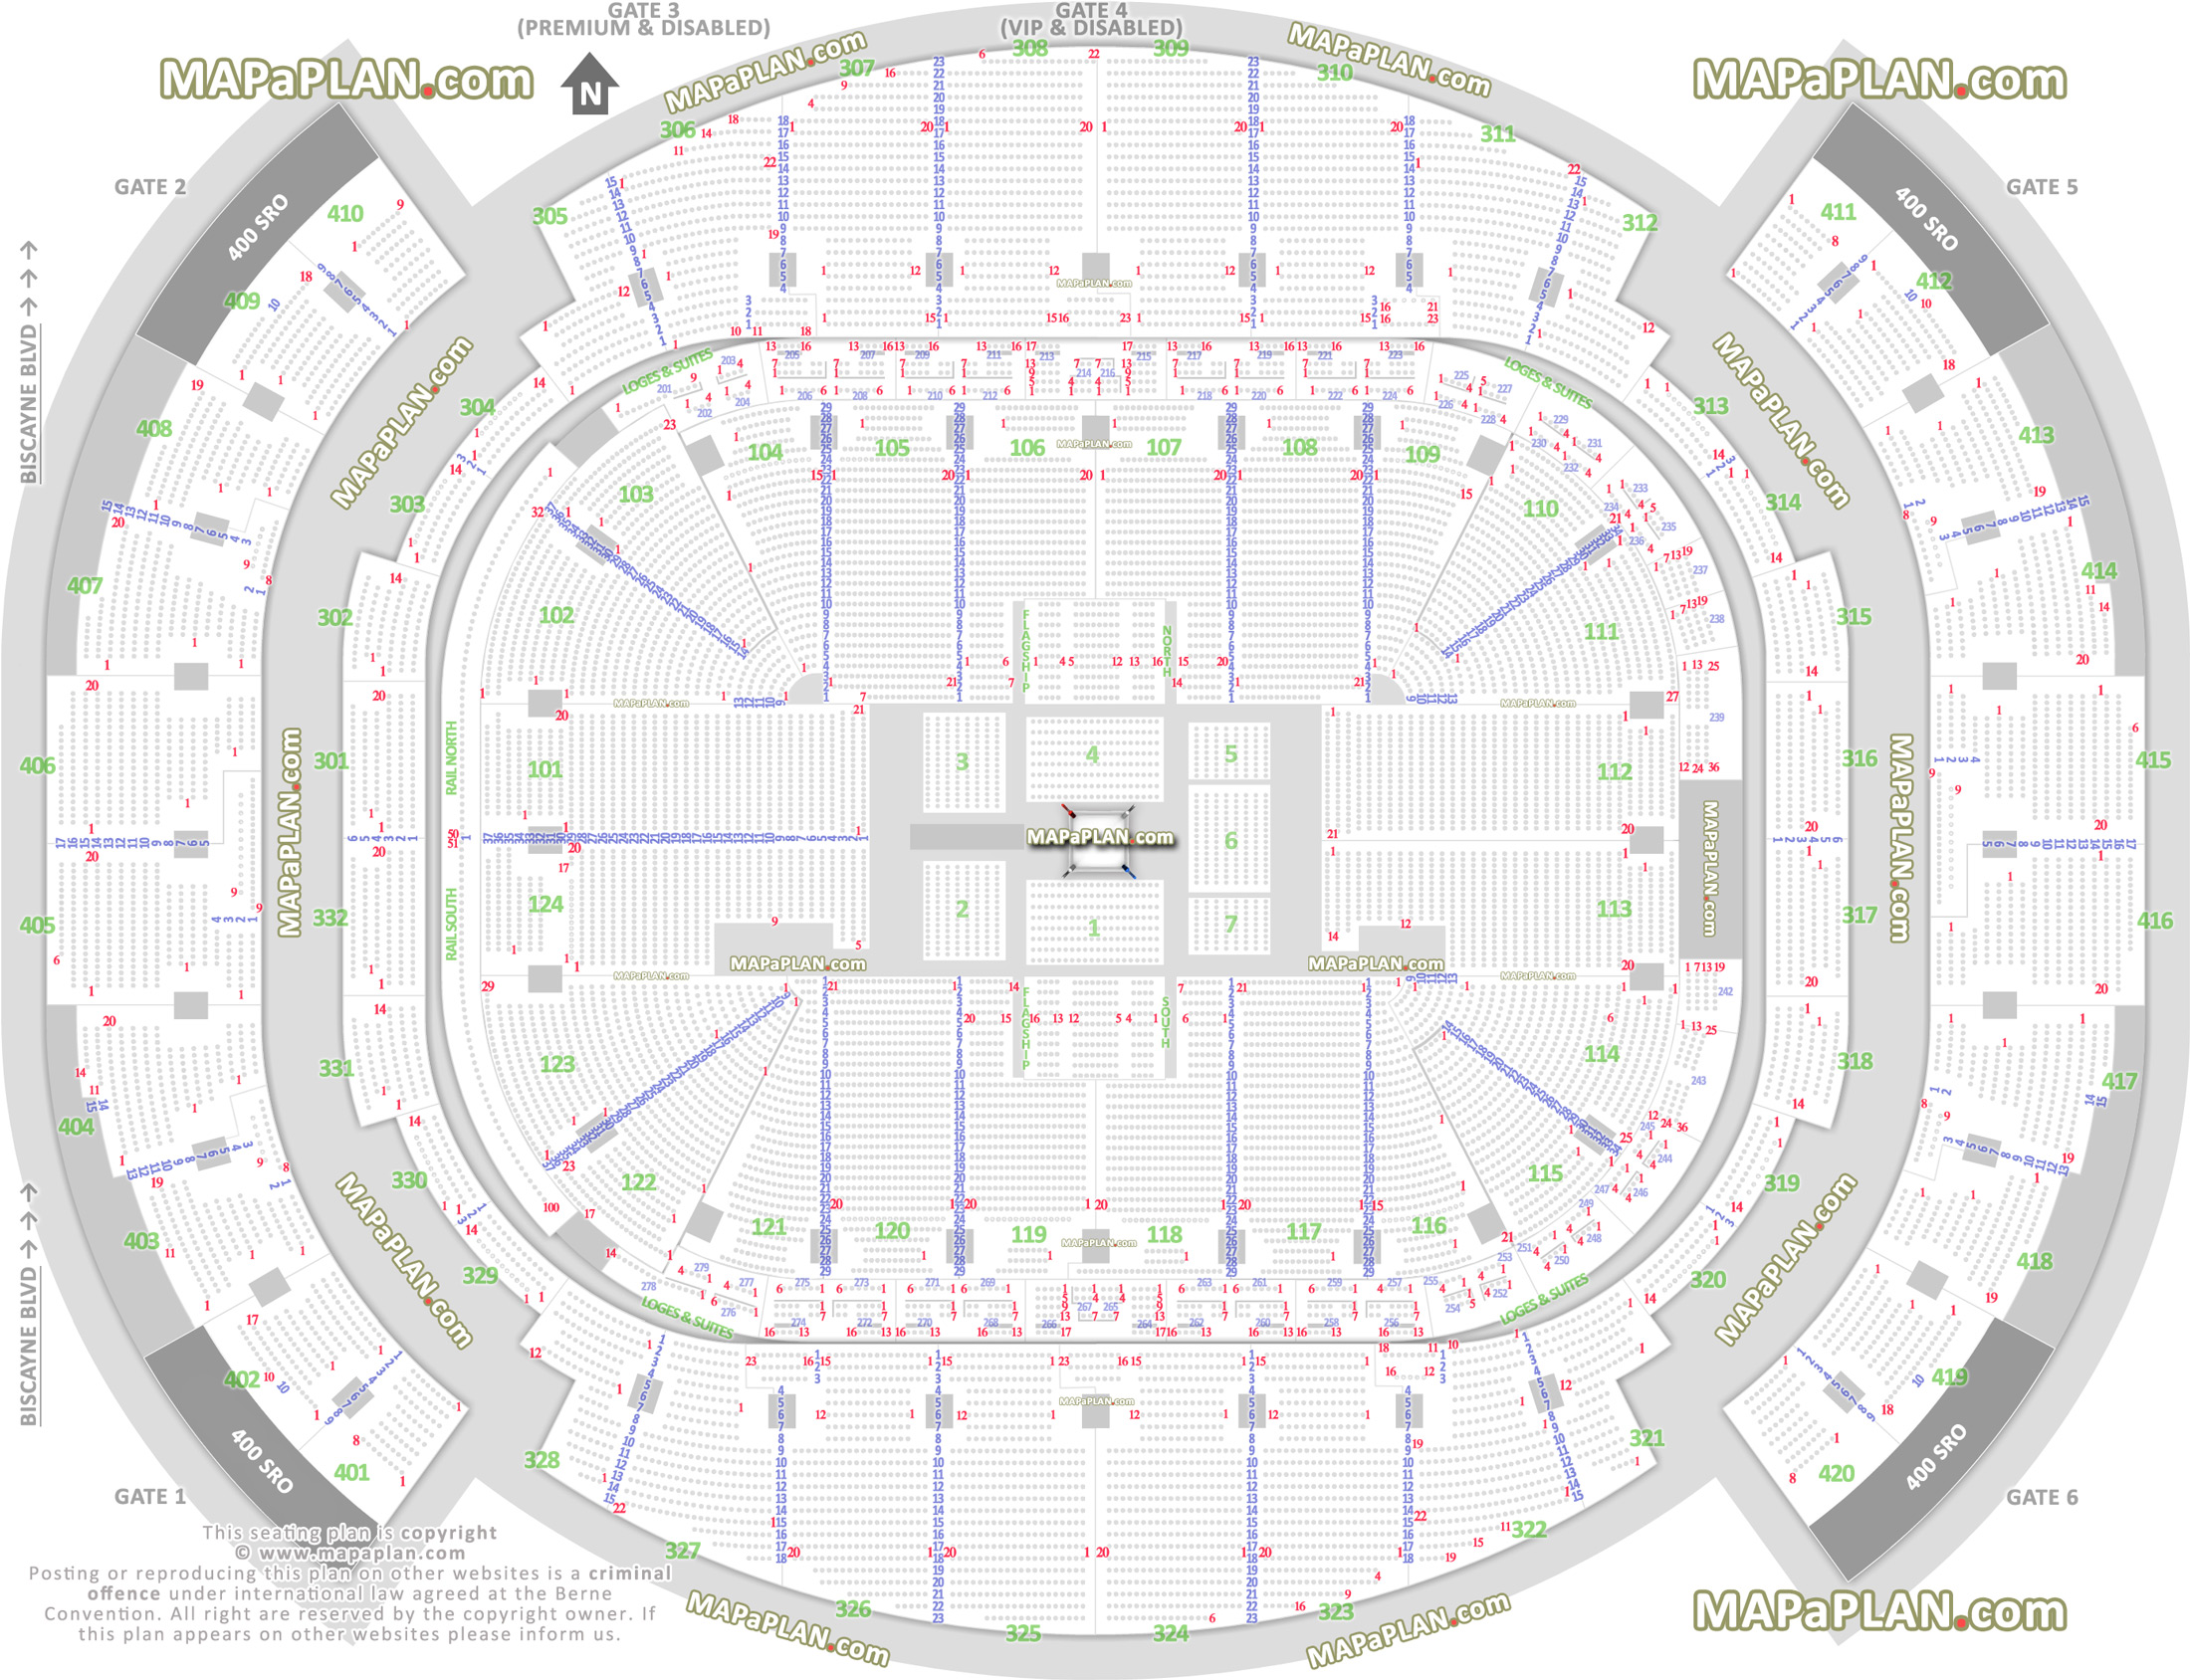 wwe raw smackdown live wrestling boxing events ring 360 configuration row numbers sro standing room only good bad seats Miami American Airlines Arena seating chart